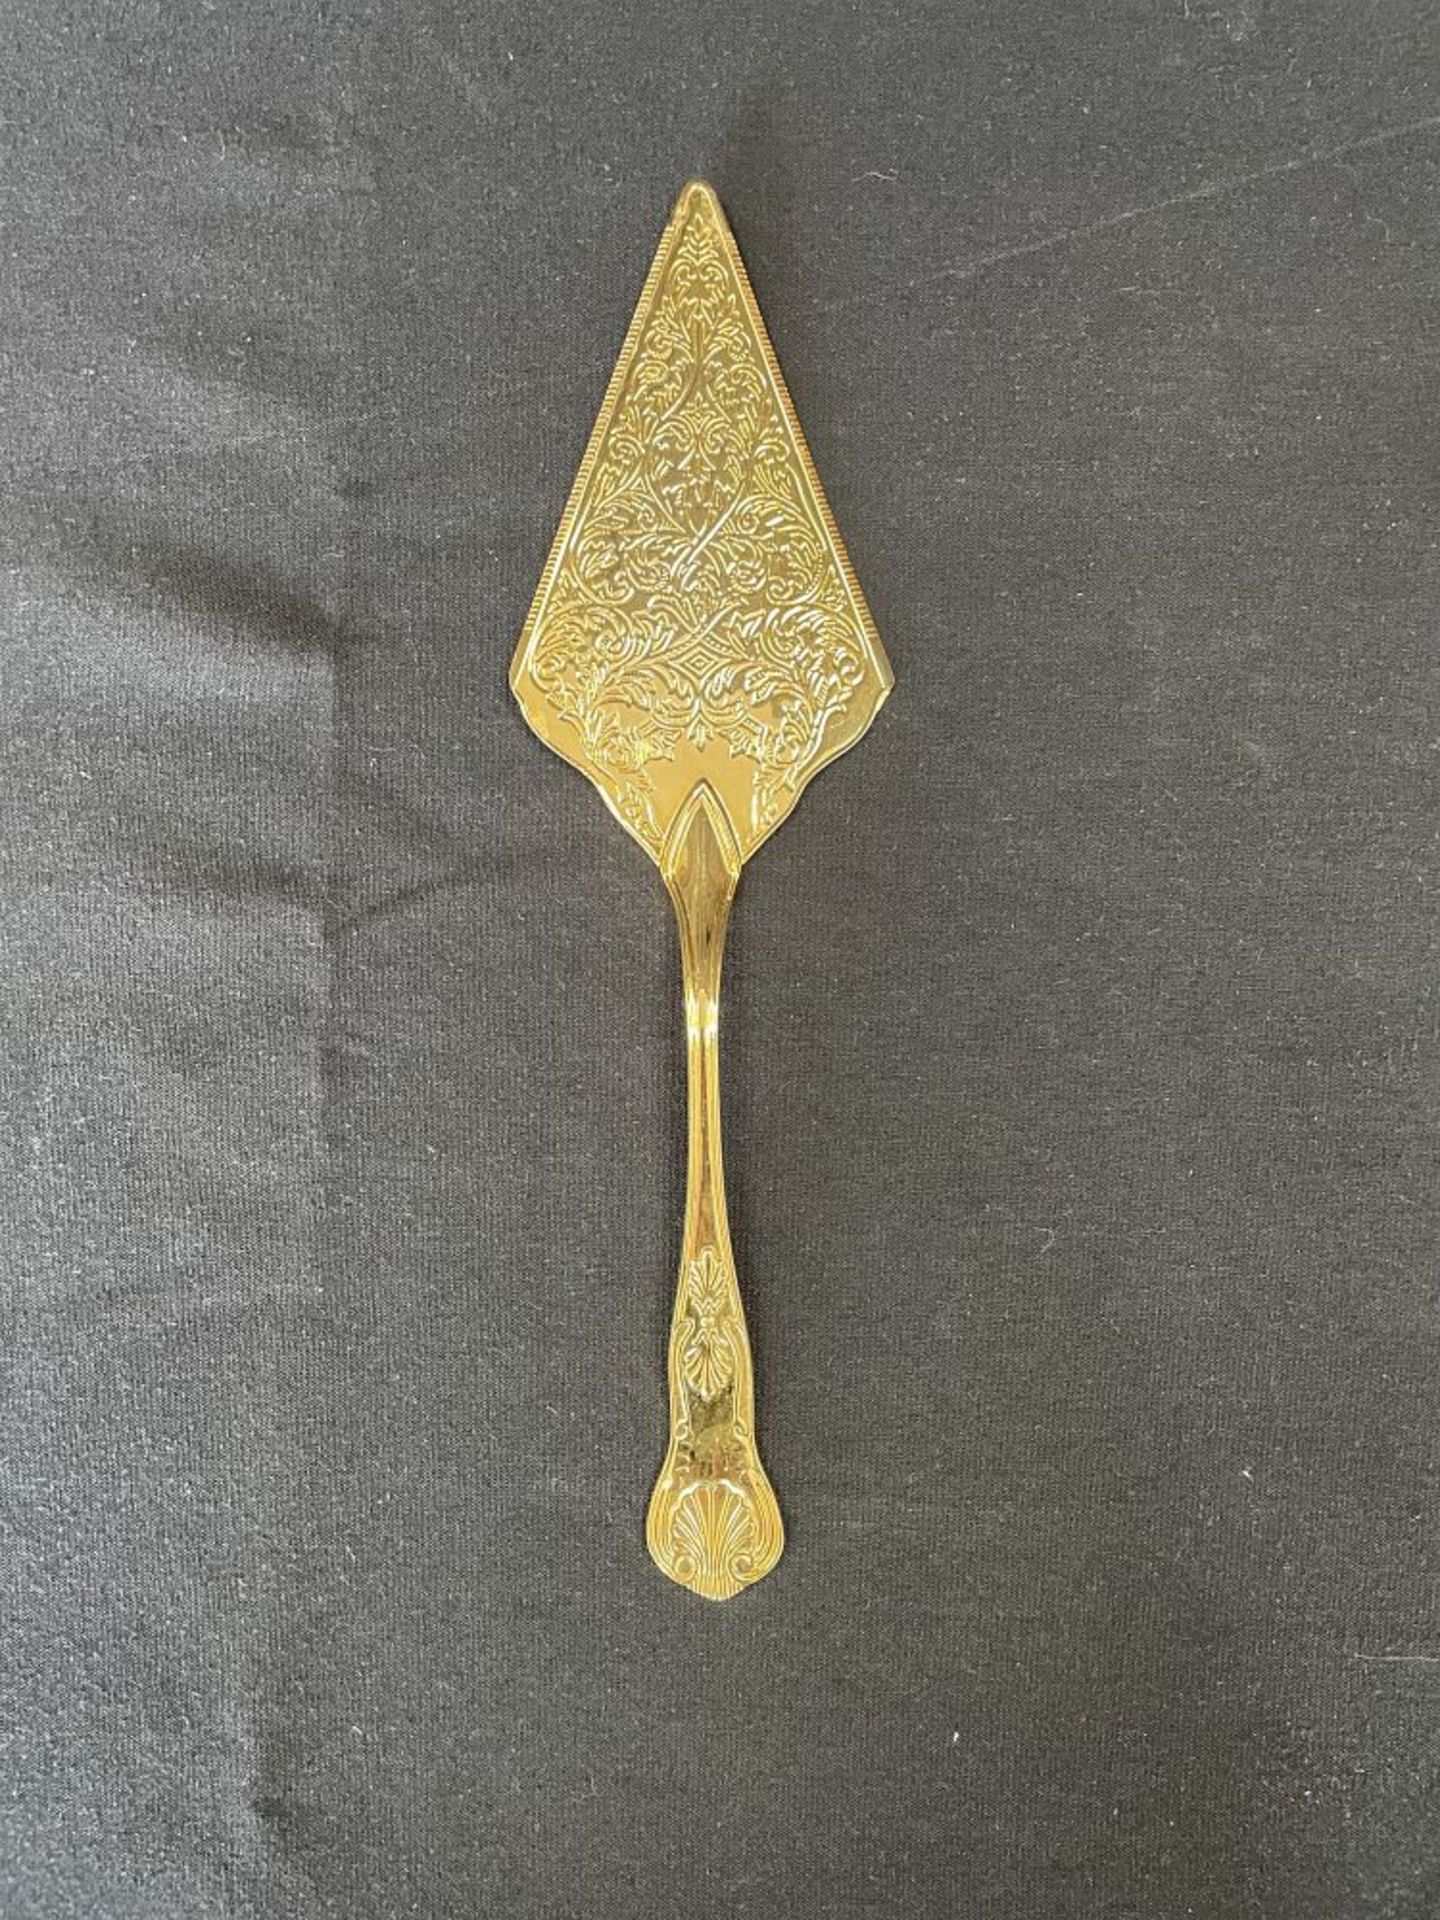 Gold plated pie server